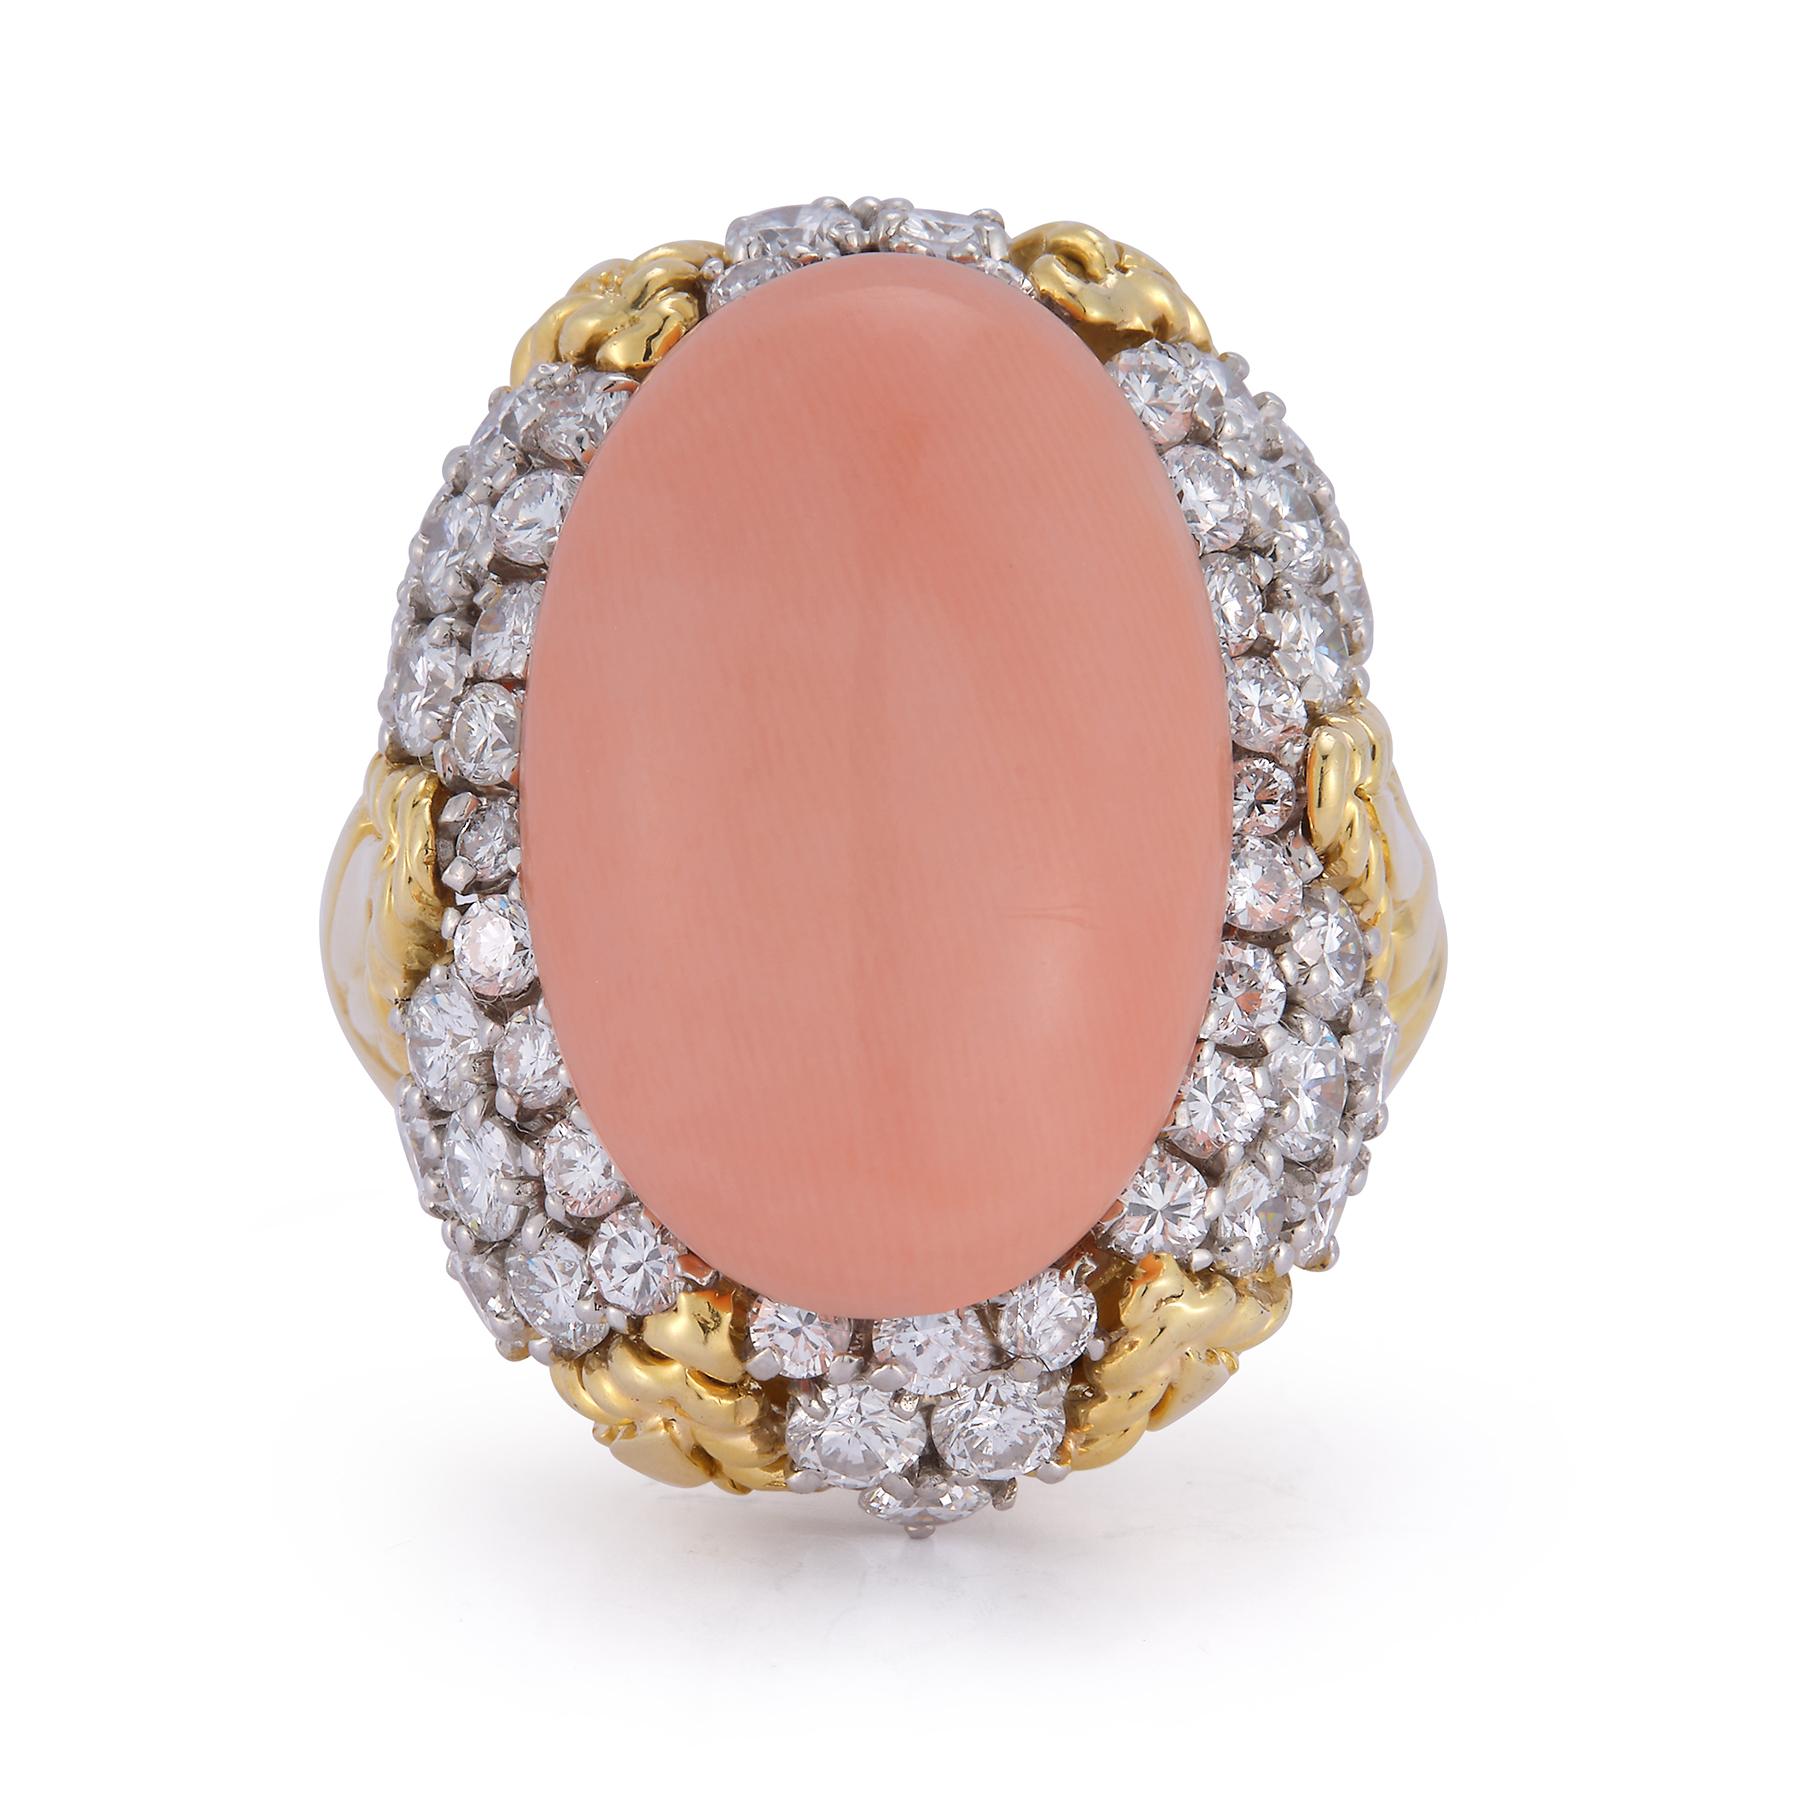 Van Cleef and Arpels Angel Skin Coral and Diamond Cocktail Ring. 

1 Cabochon angel skin coral with round cut side diamonds set in 18k yellow gold.

Ring Size: 6.5

Signed, Van Cleef & Arpels & numbered 
